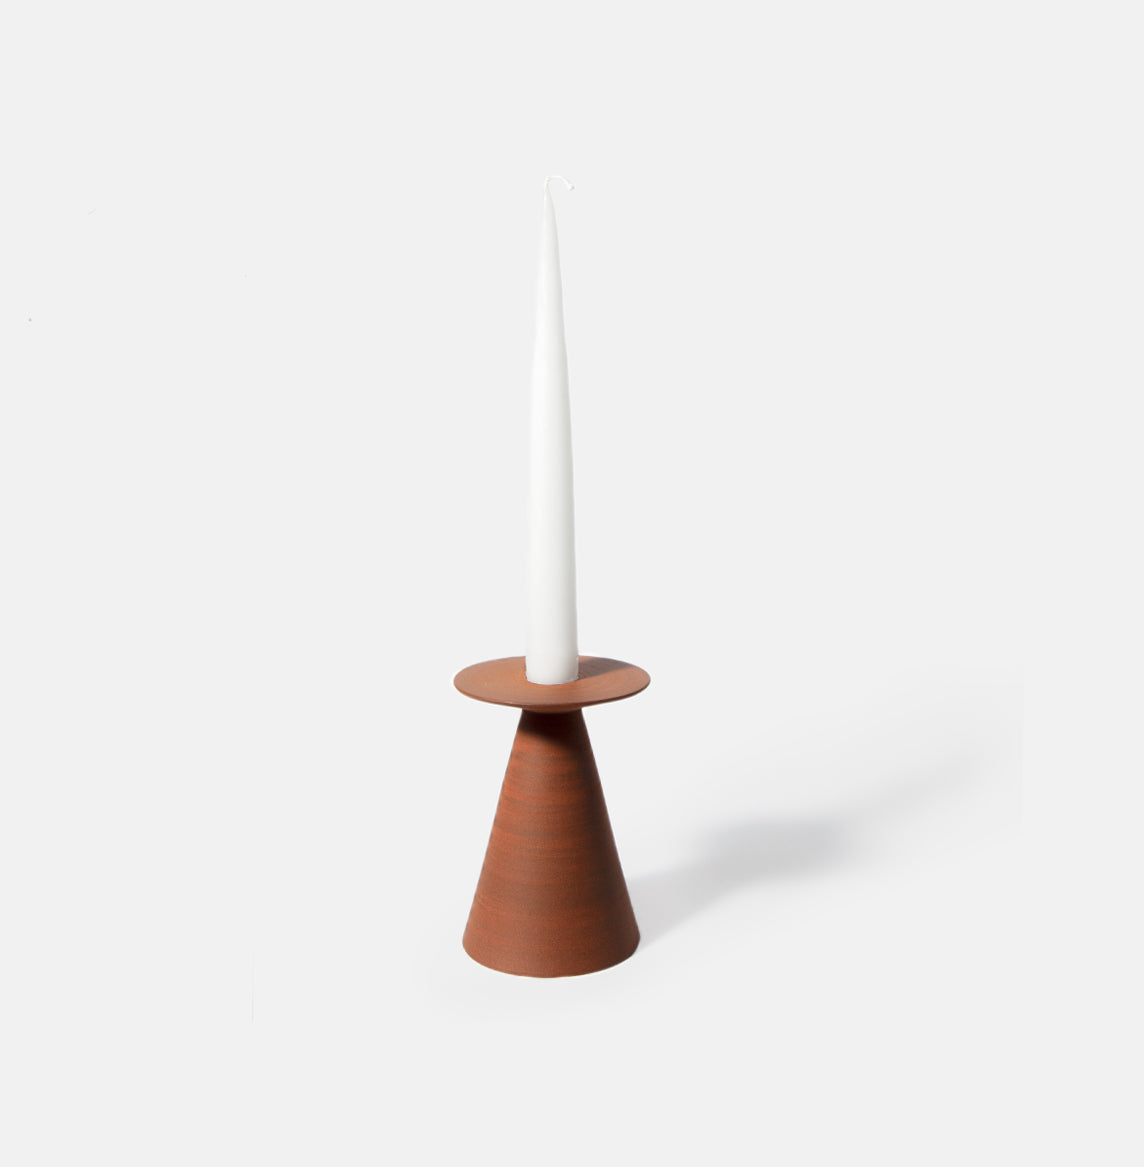 Cone Candle Holder